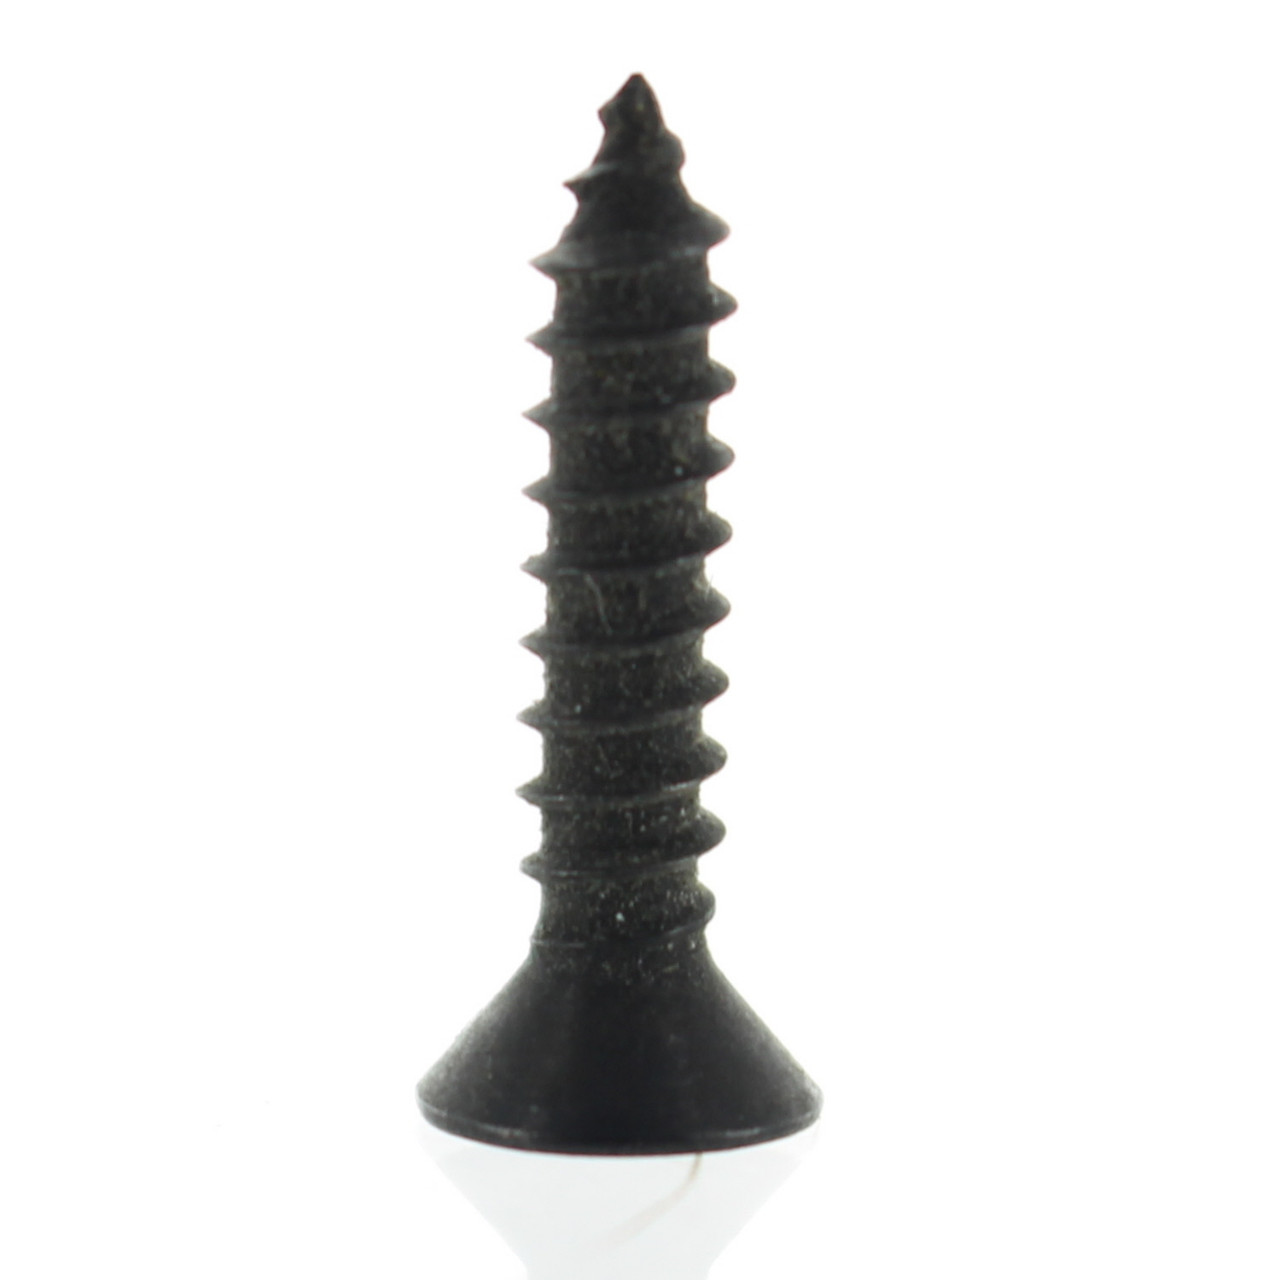 Sea-Doo New OEM Tapping Screw M3.5x19, Pack of 10, 250000092